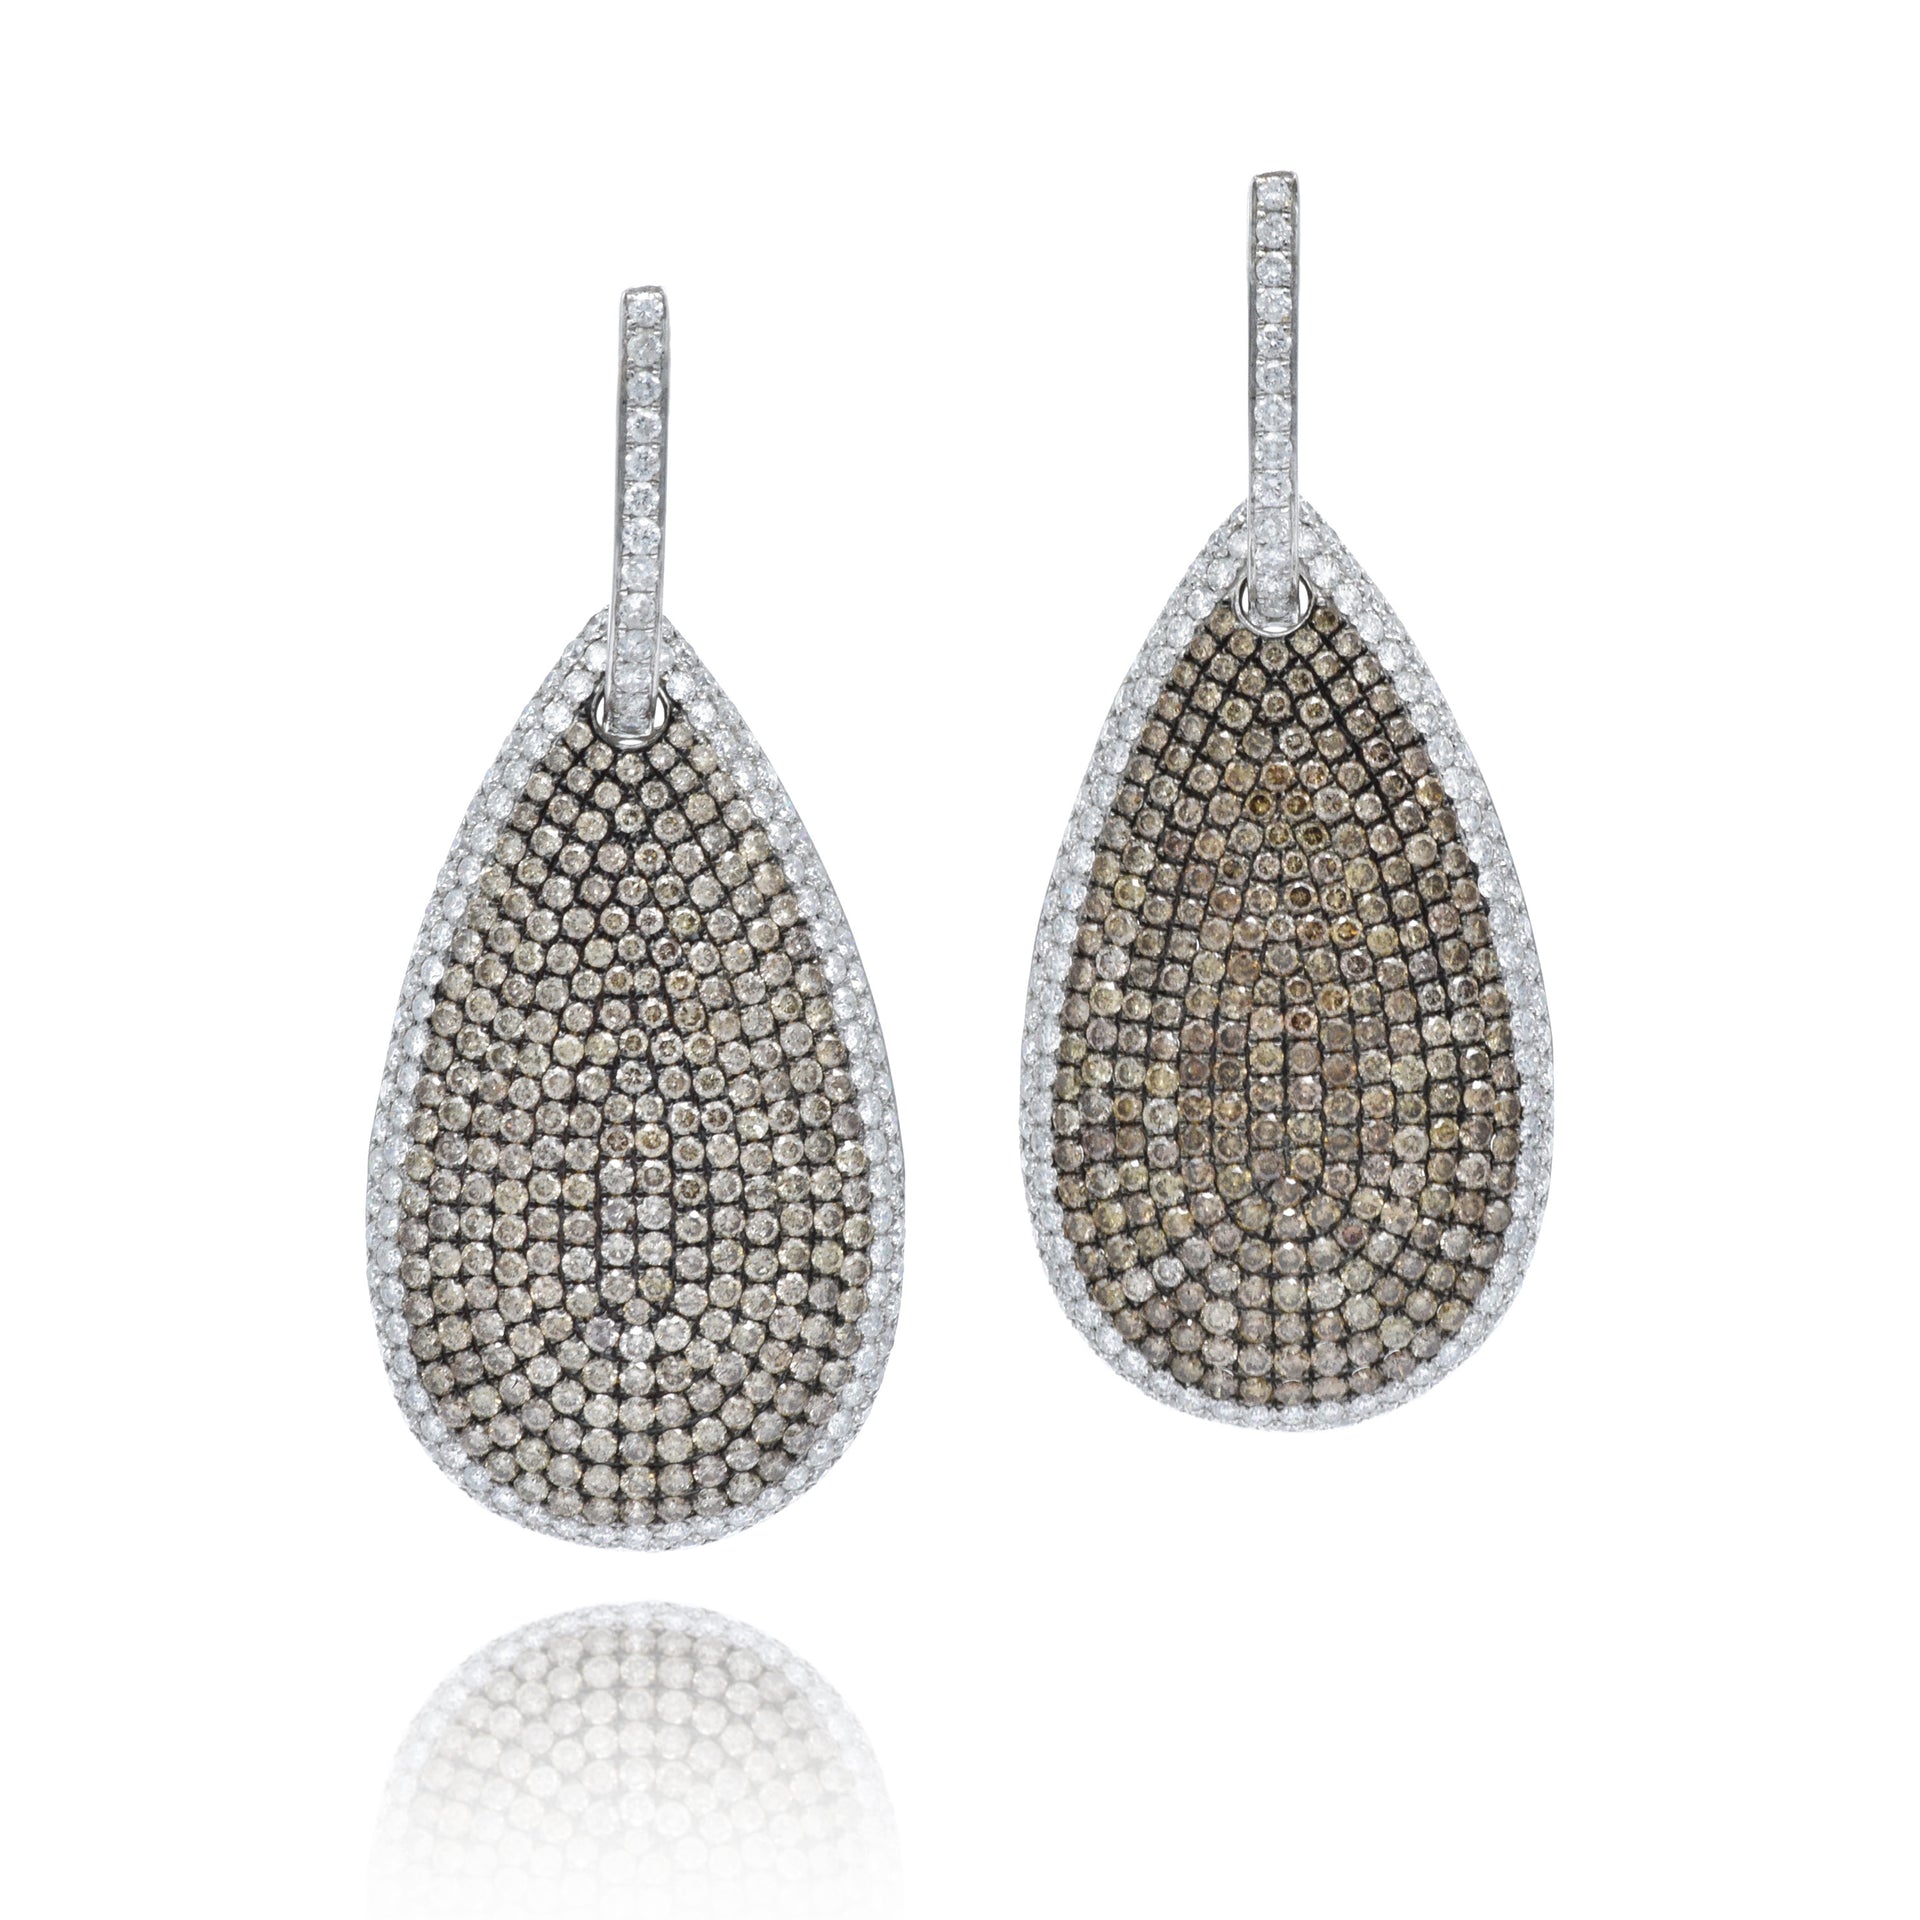 Champagne and White Diamond Drop Earrings